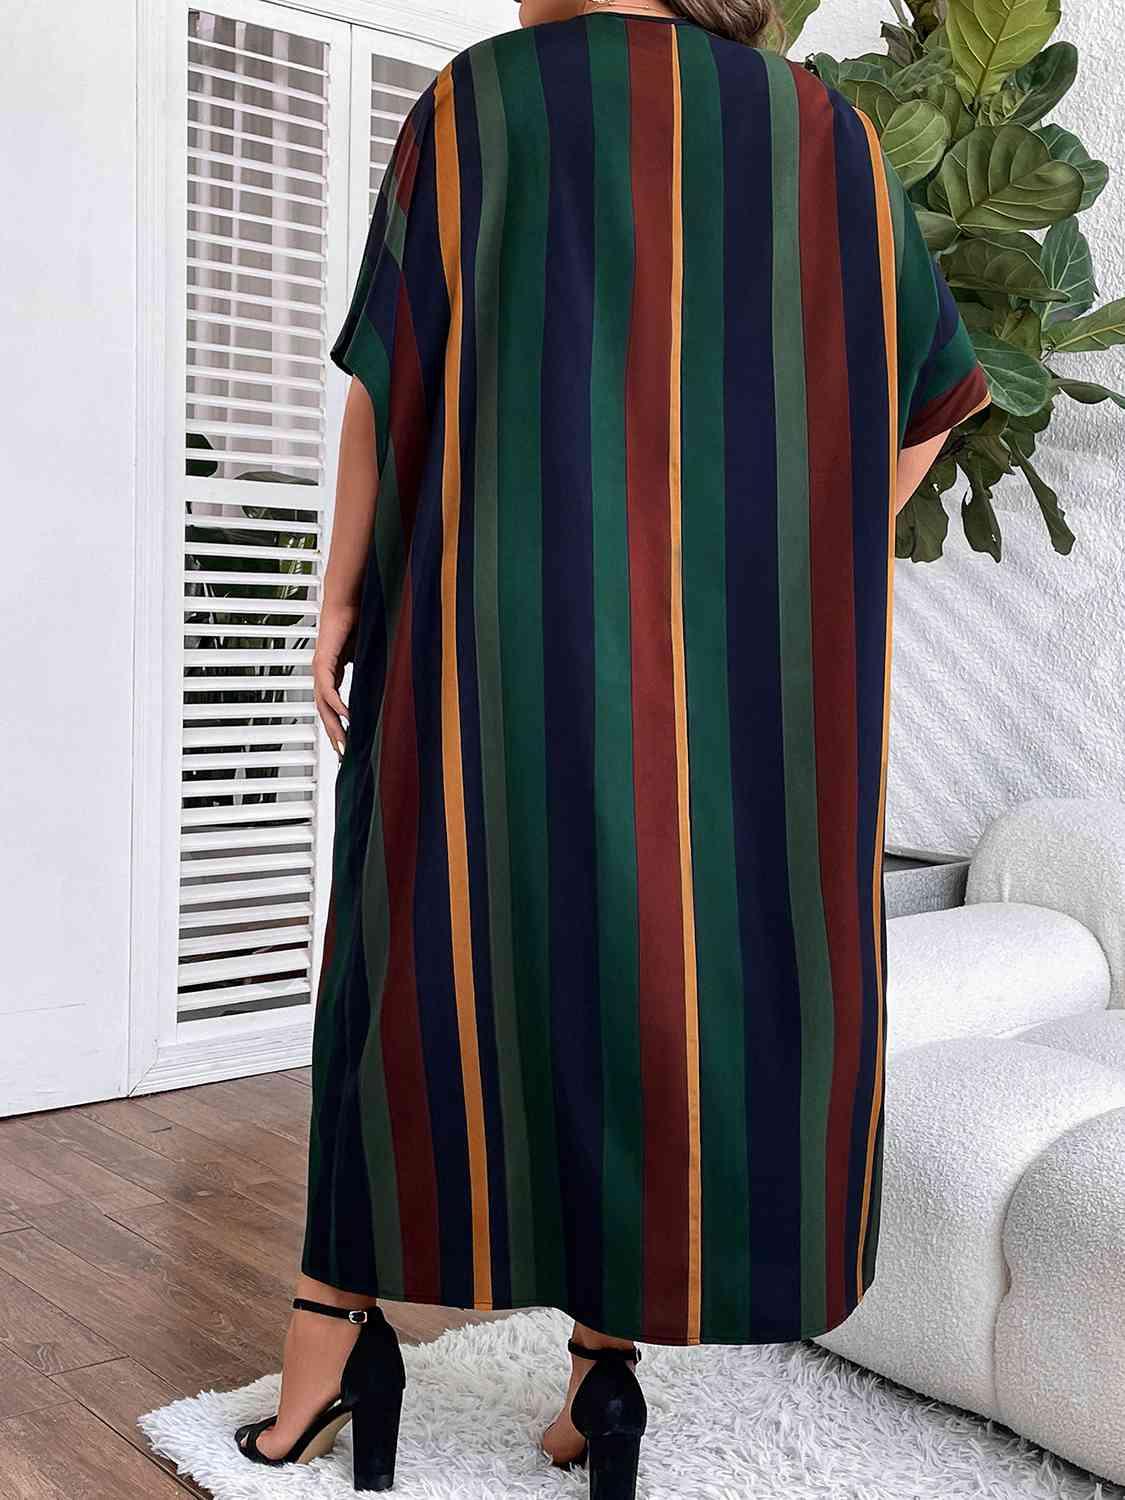 a woman standing in a living room wearing a striped dress